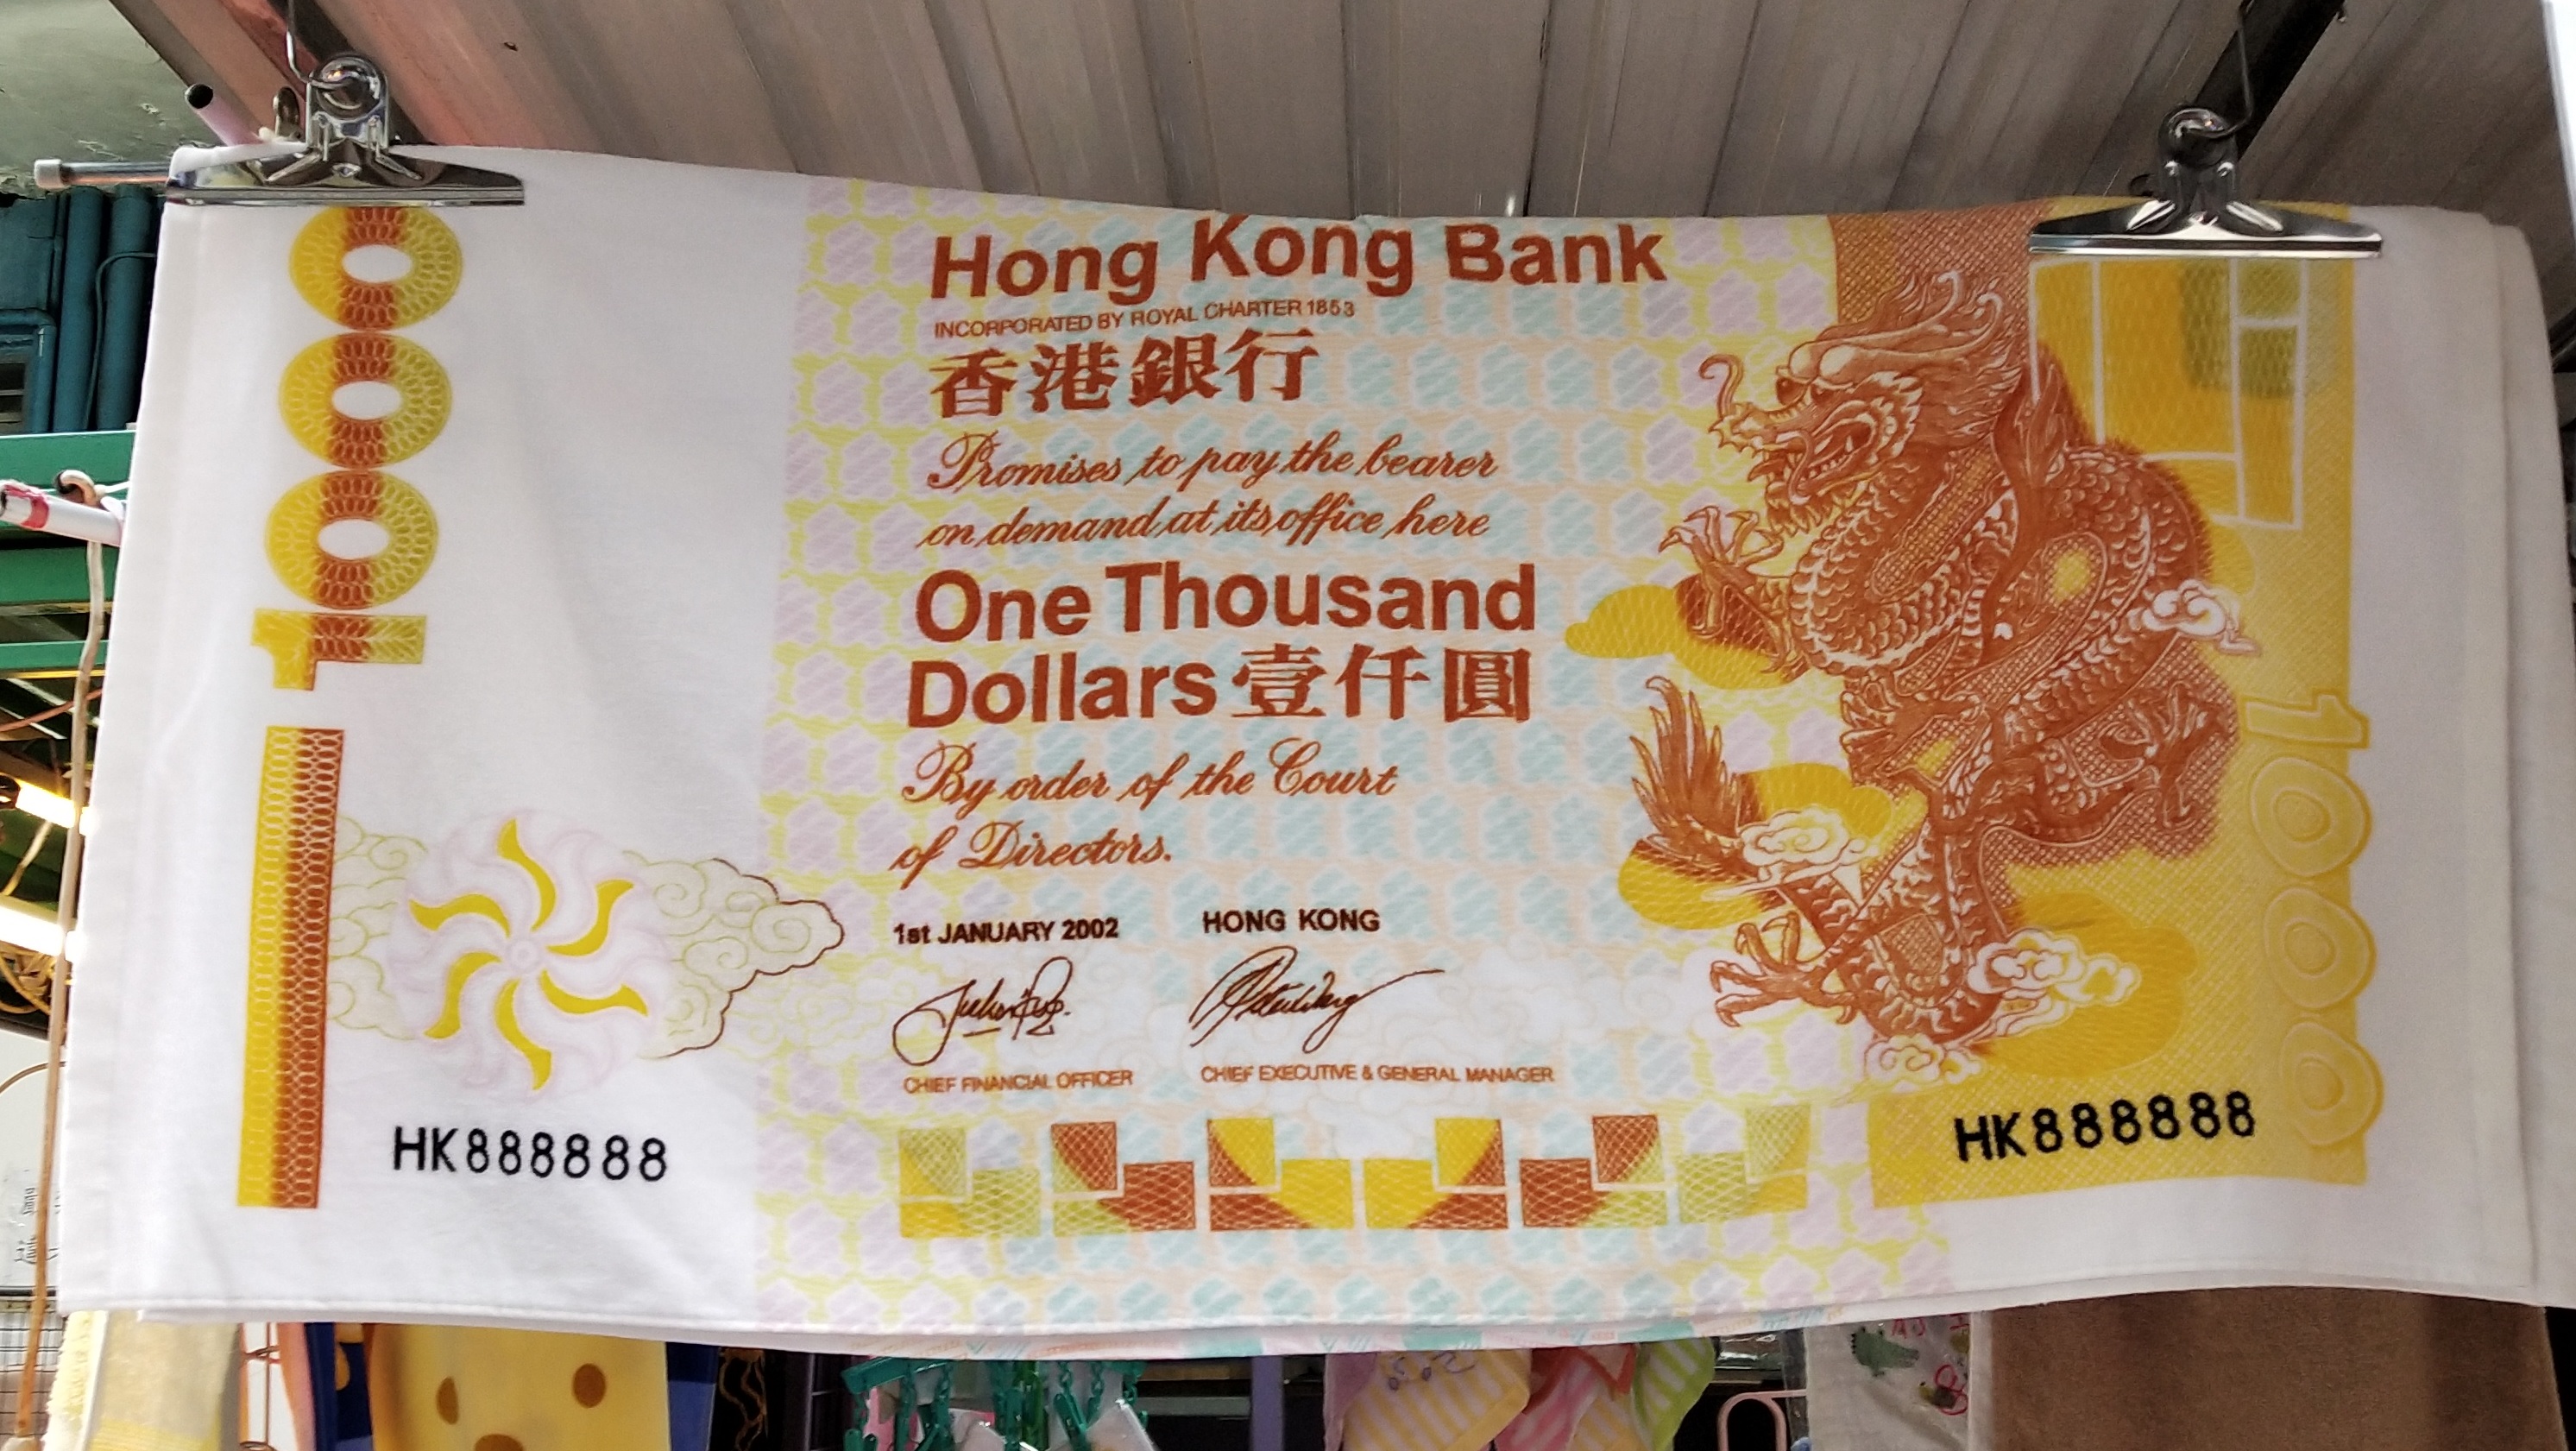 Share Frank’s happiness about Hong Kong SAR Government 10000 dollars cash payout scheme